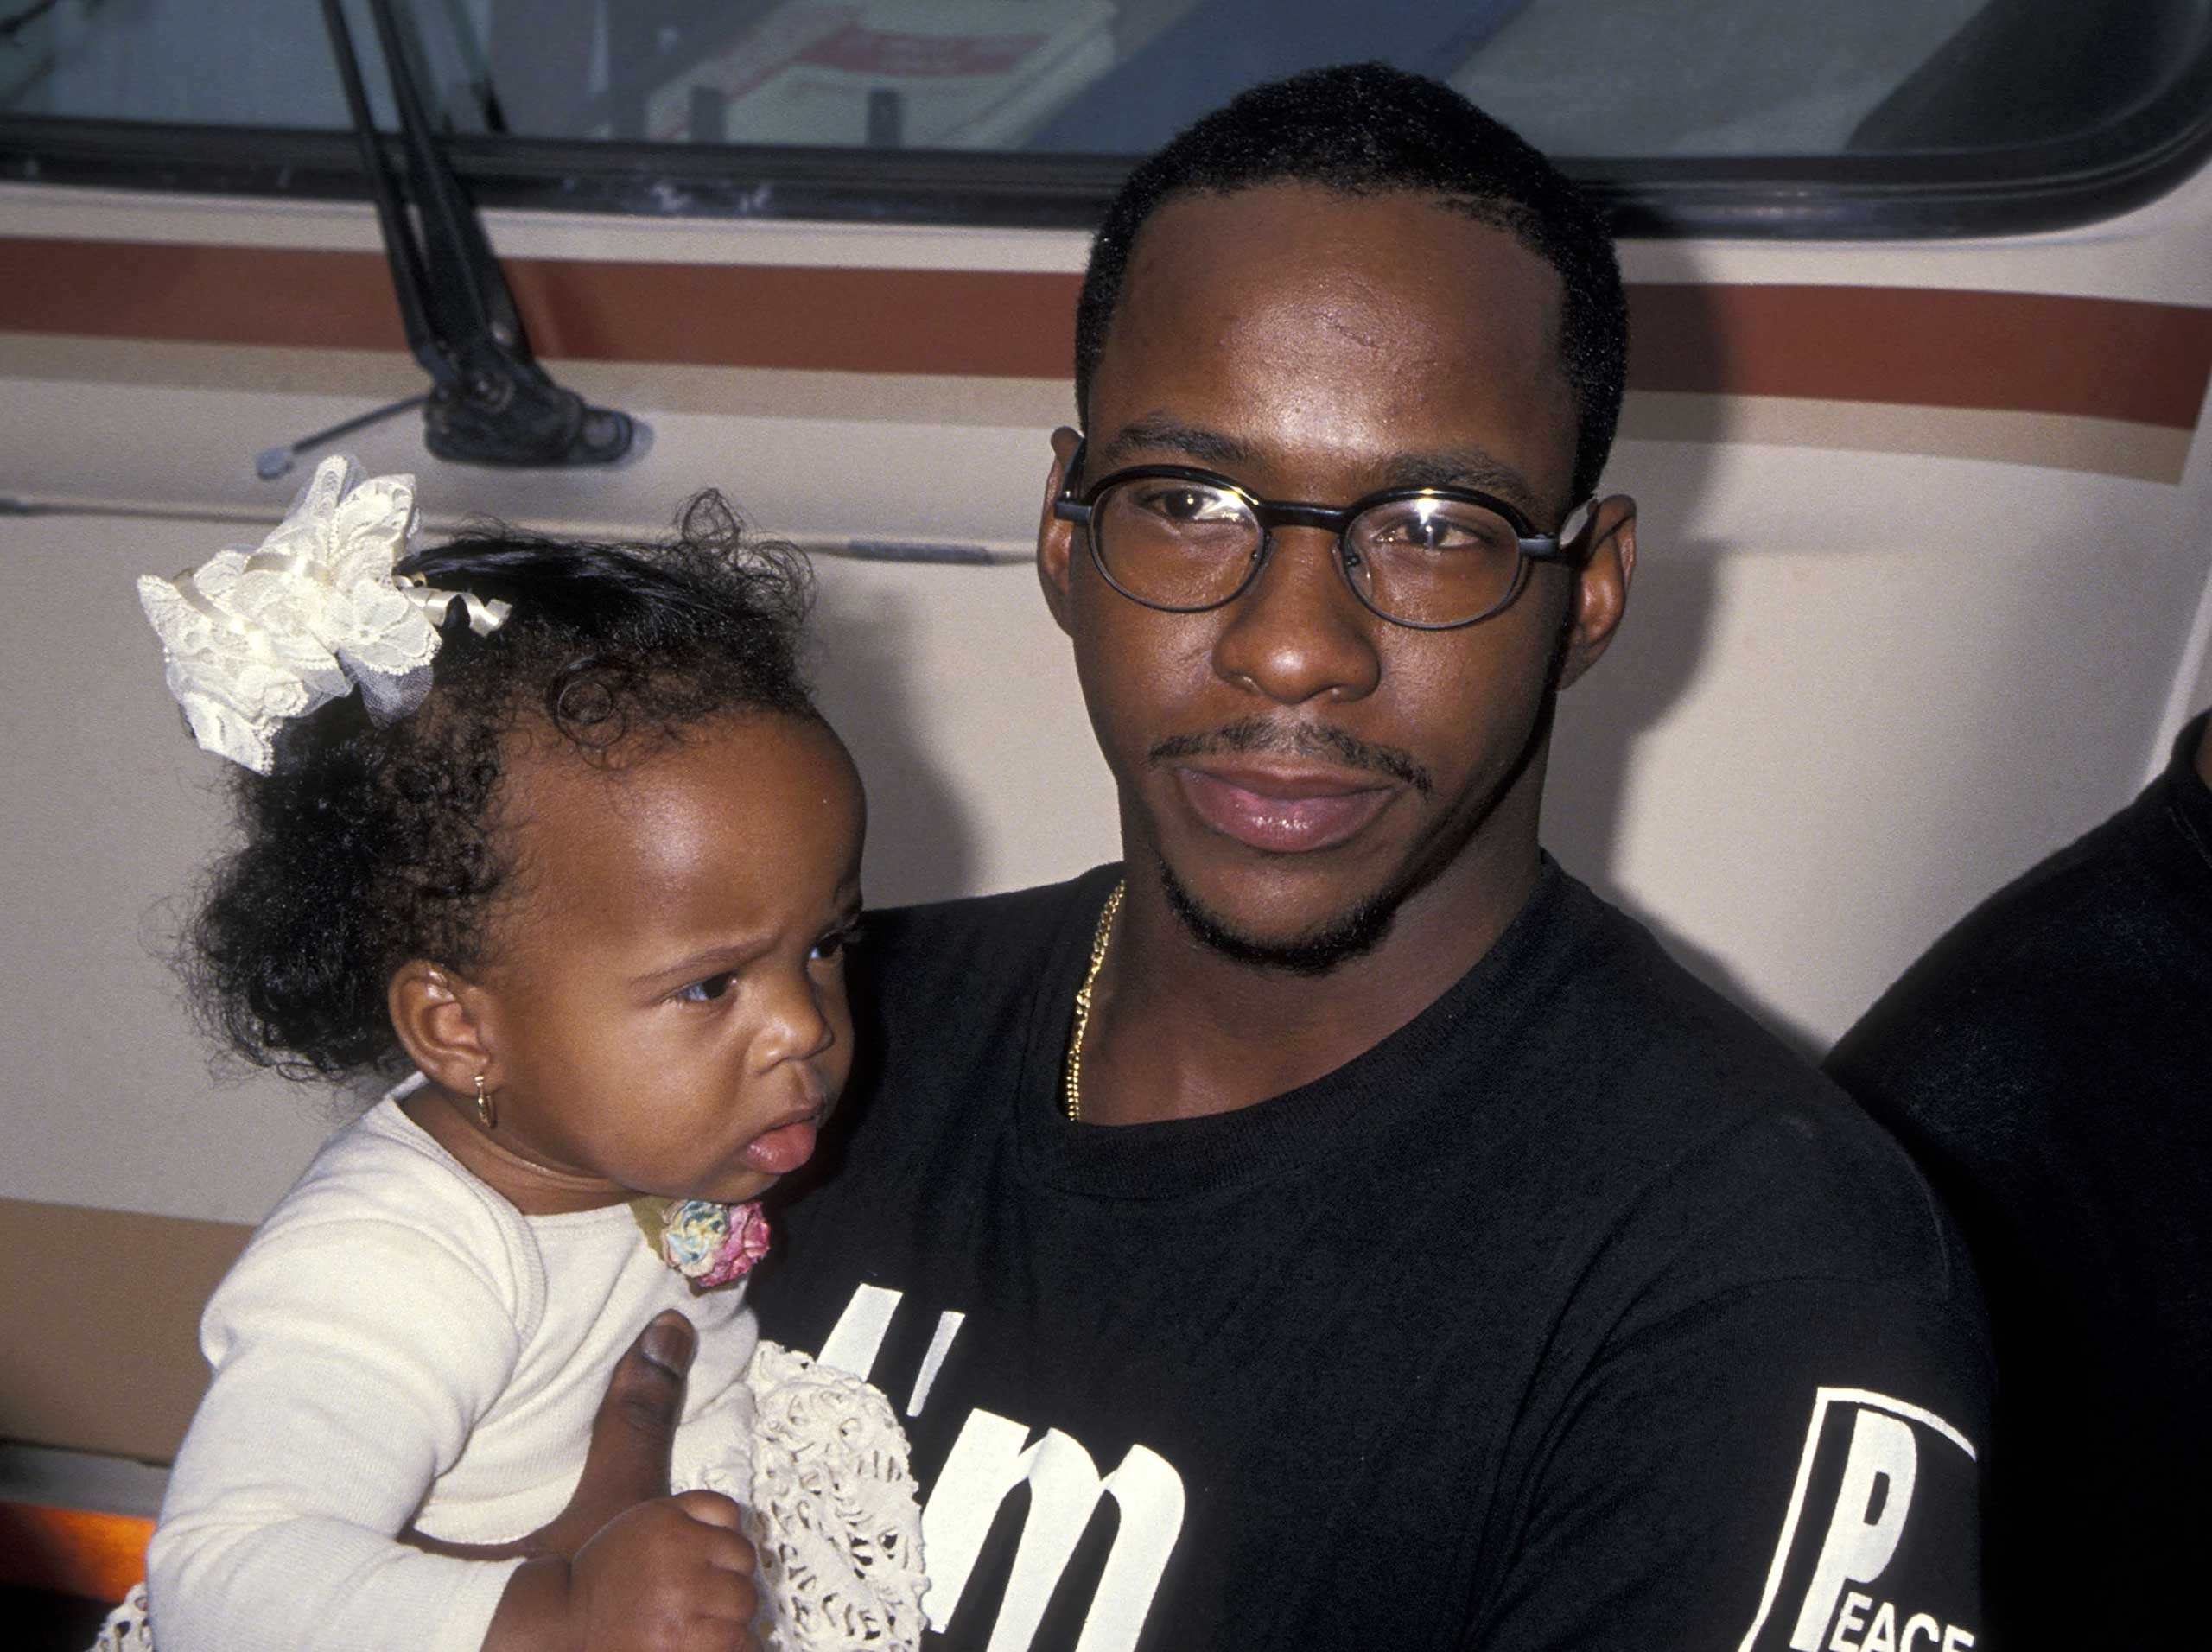 Singer Bobby Brown and daughter Bobbi Kristina Brown attend the Eighth Annual Soul Train Music Awards on March 15, 1994 at Shrine Auditorium in Los Angeles.